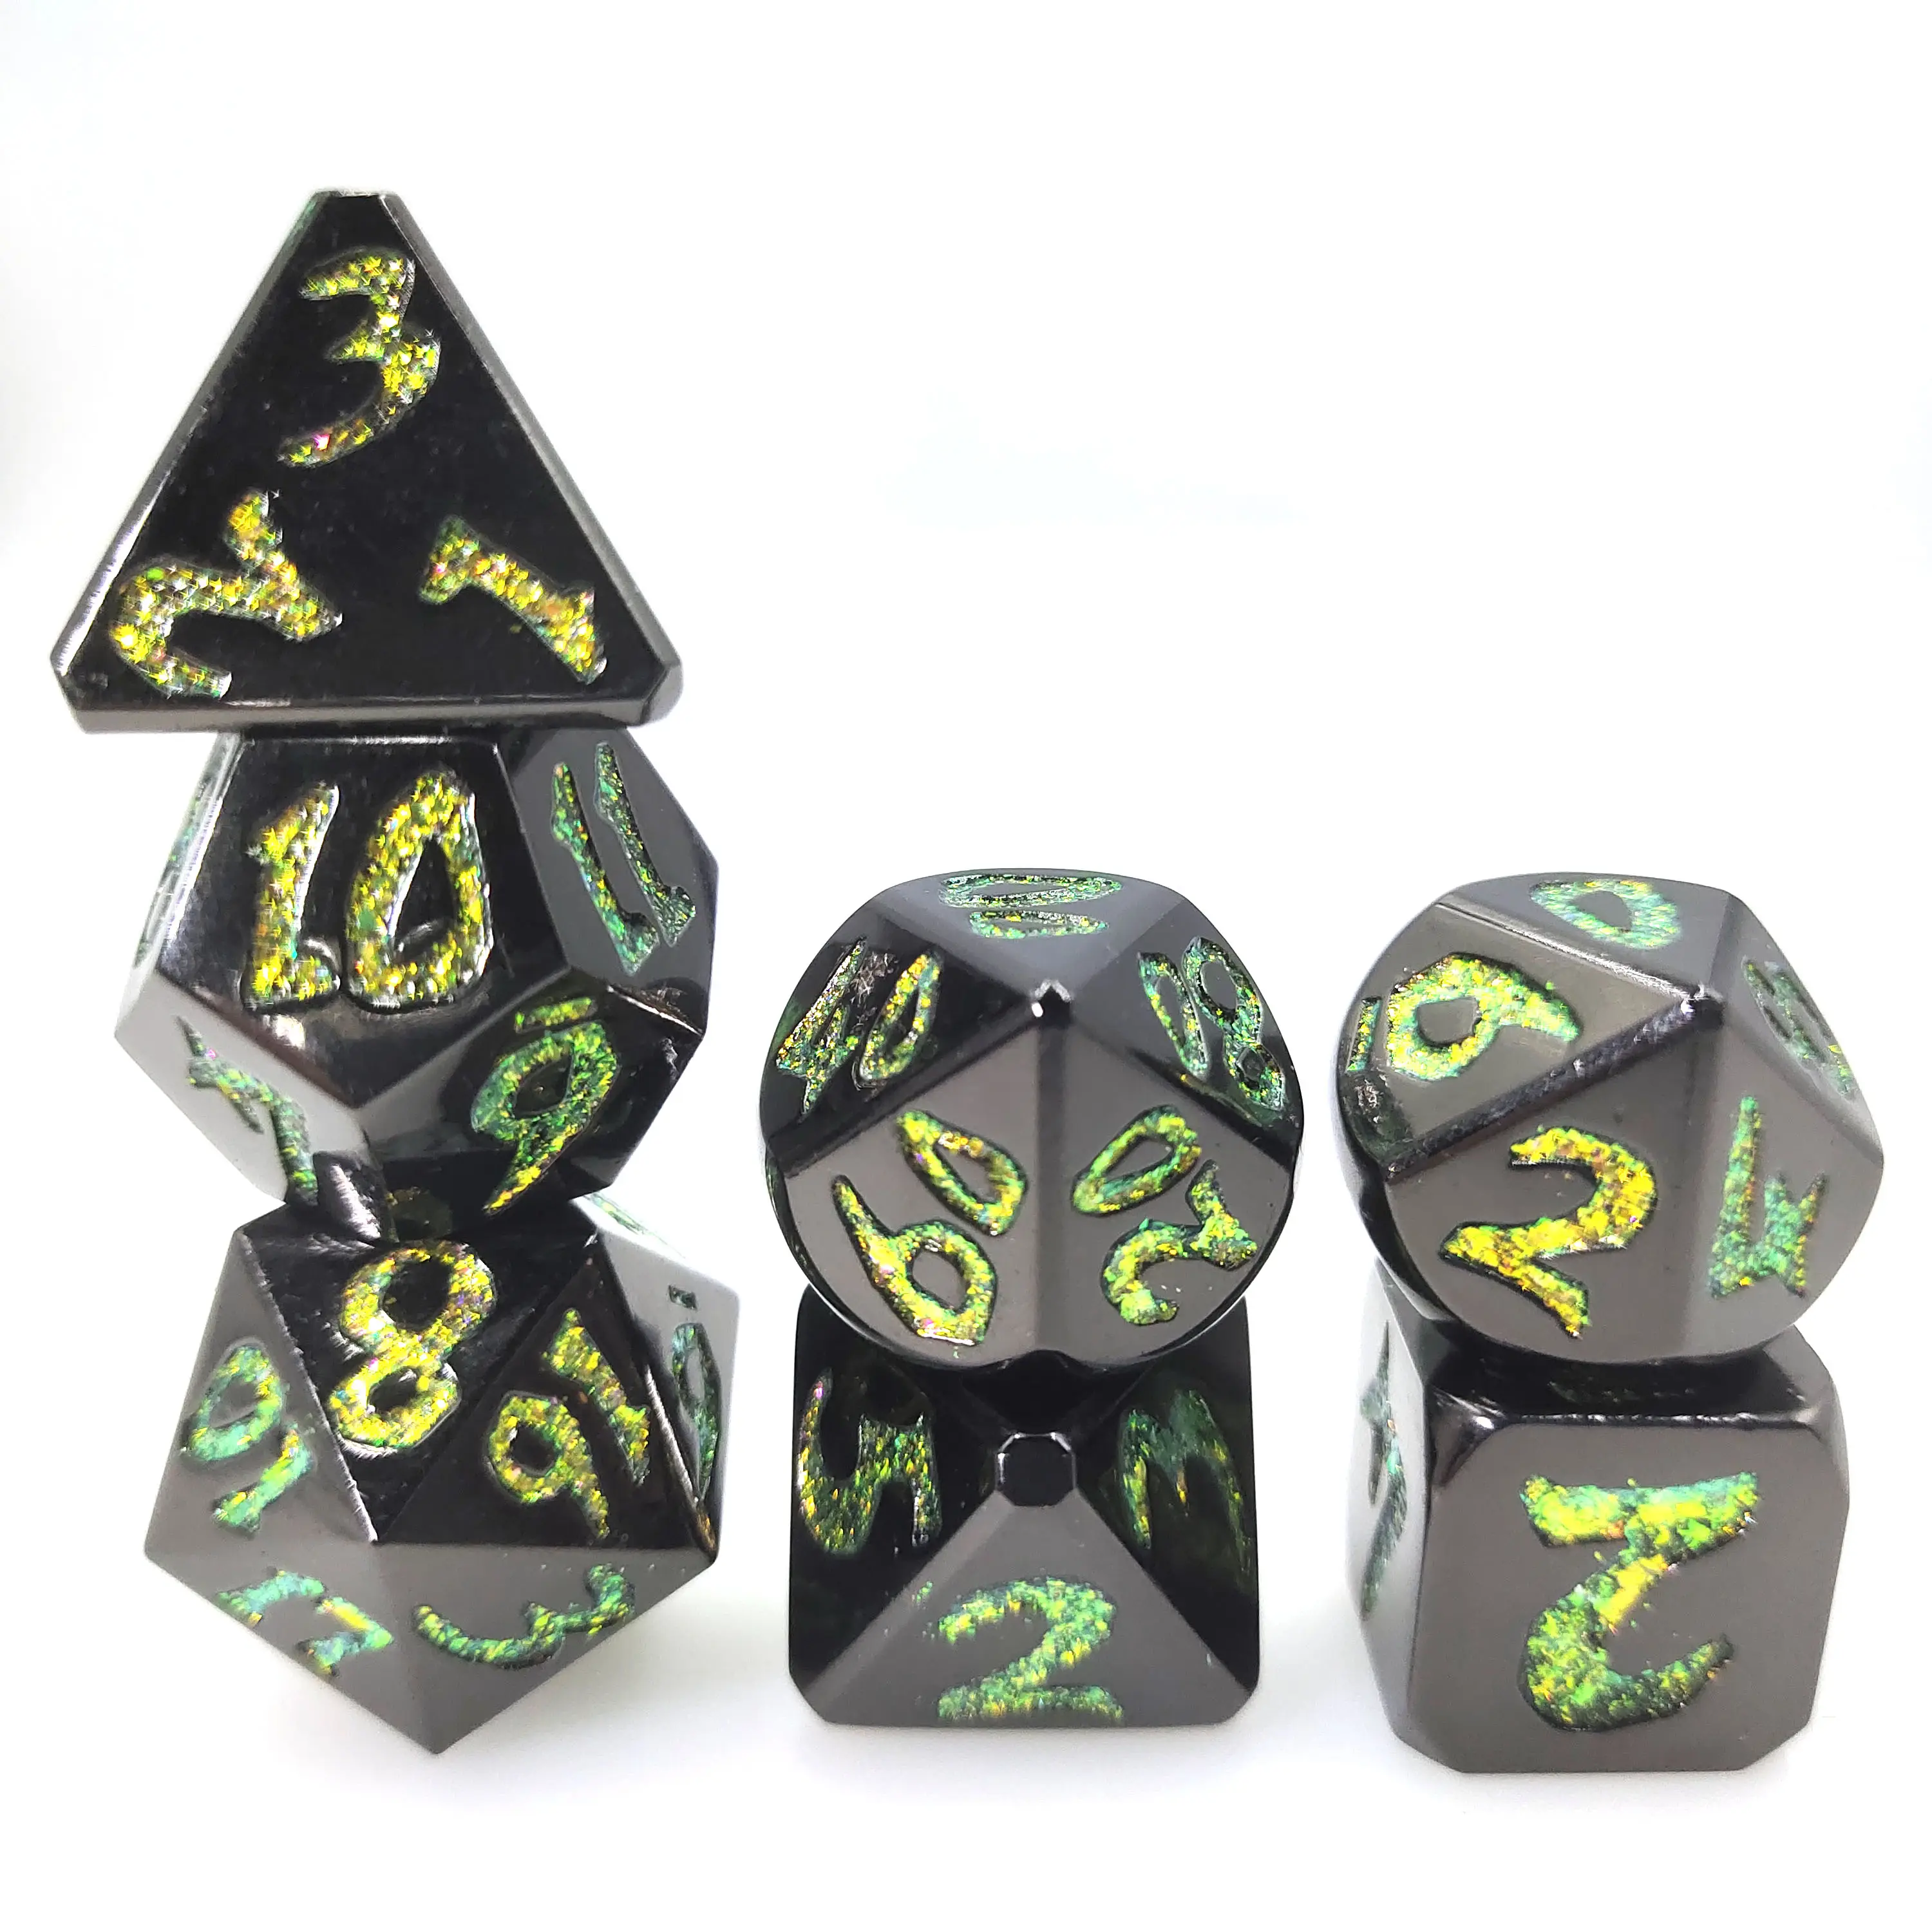 7 RPG Polyhedral Dice Set D&d Custom Color Number D20 Dnd Dungeons And Dragons Metal Dice